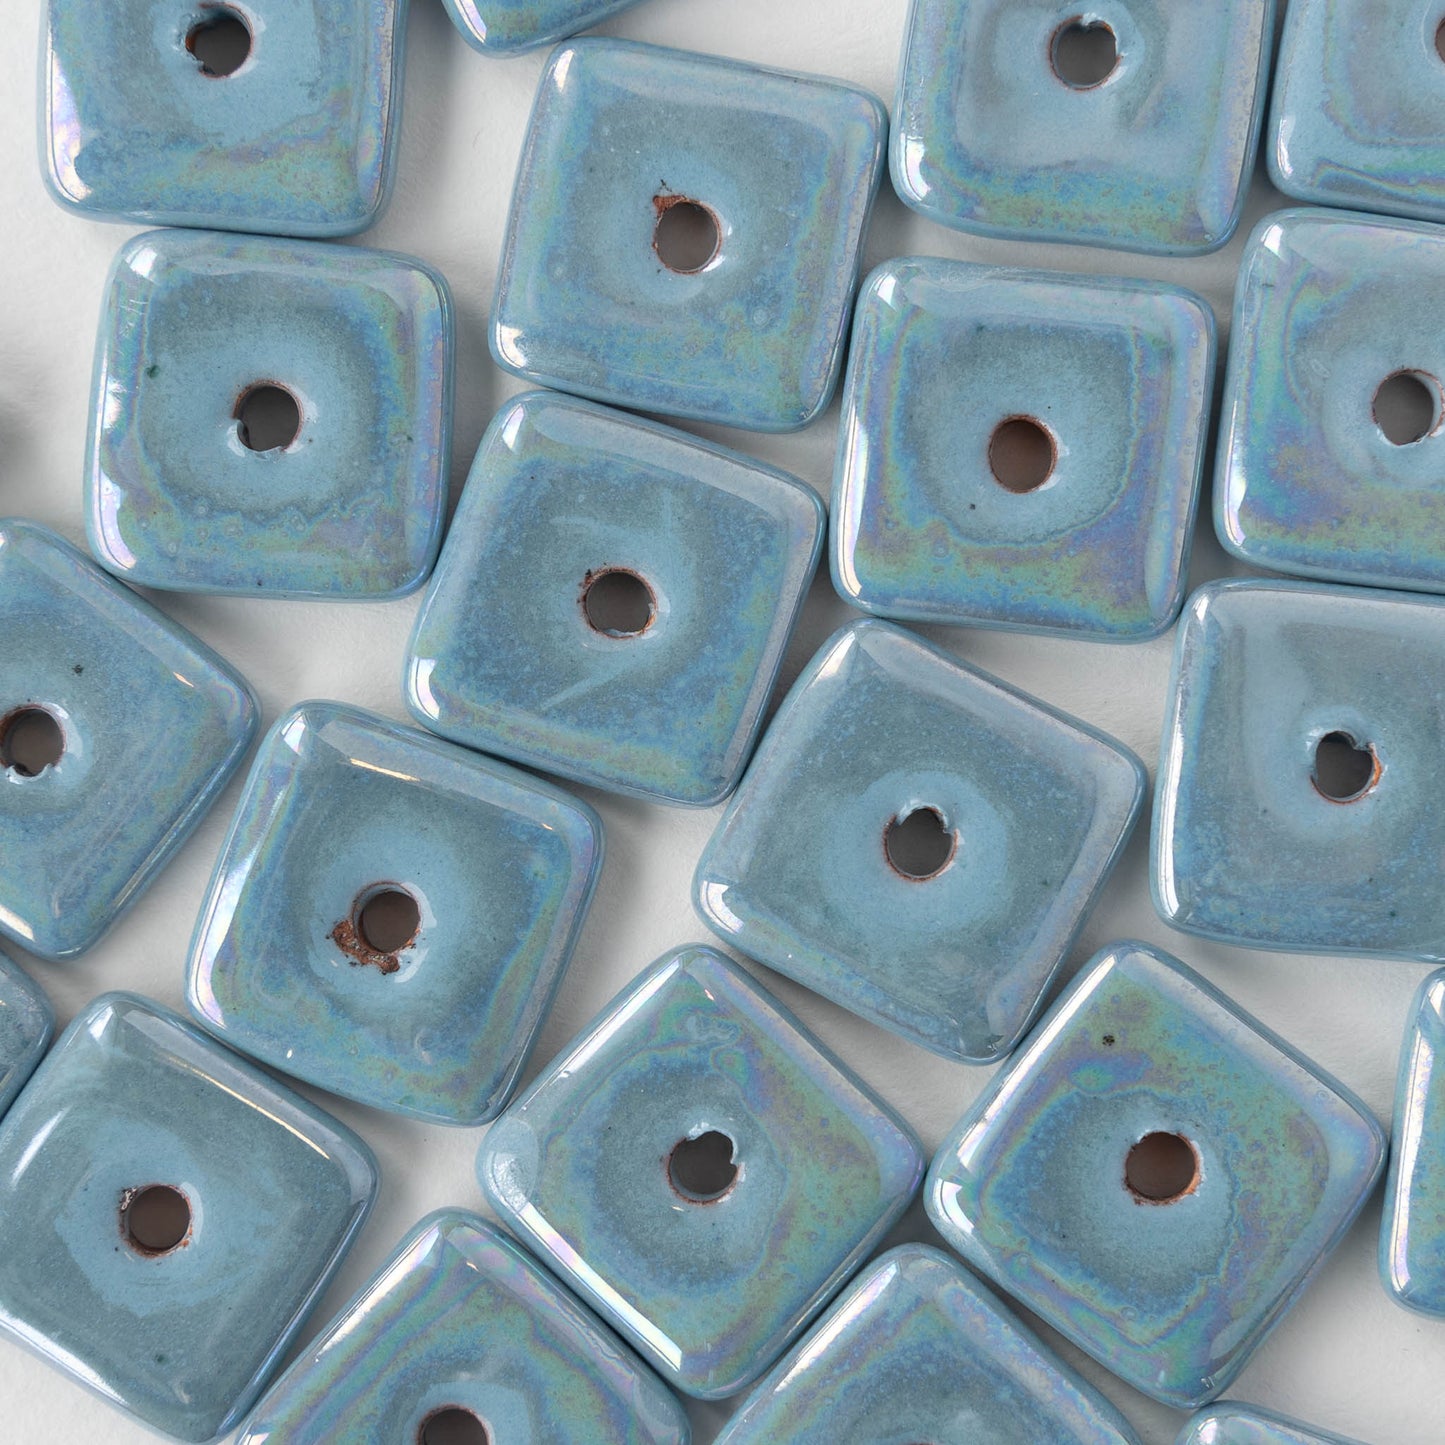 Load image into Gallery viewer, 17mm Glazed Ceramic Square Tiles - Iridescent Light Blue - 10 beads
